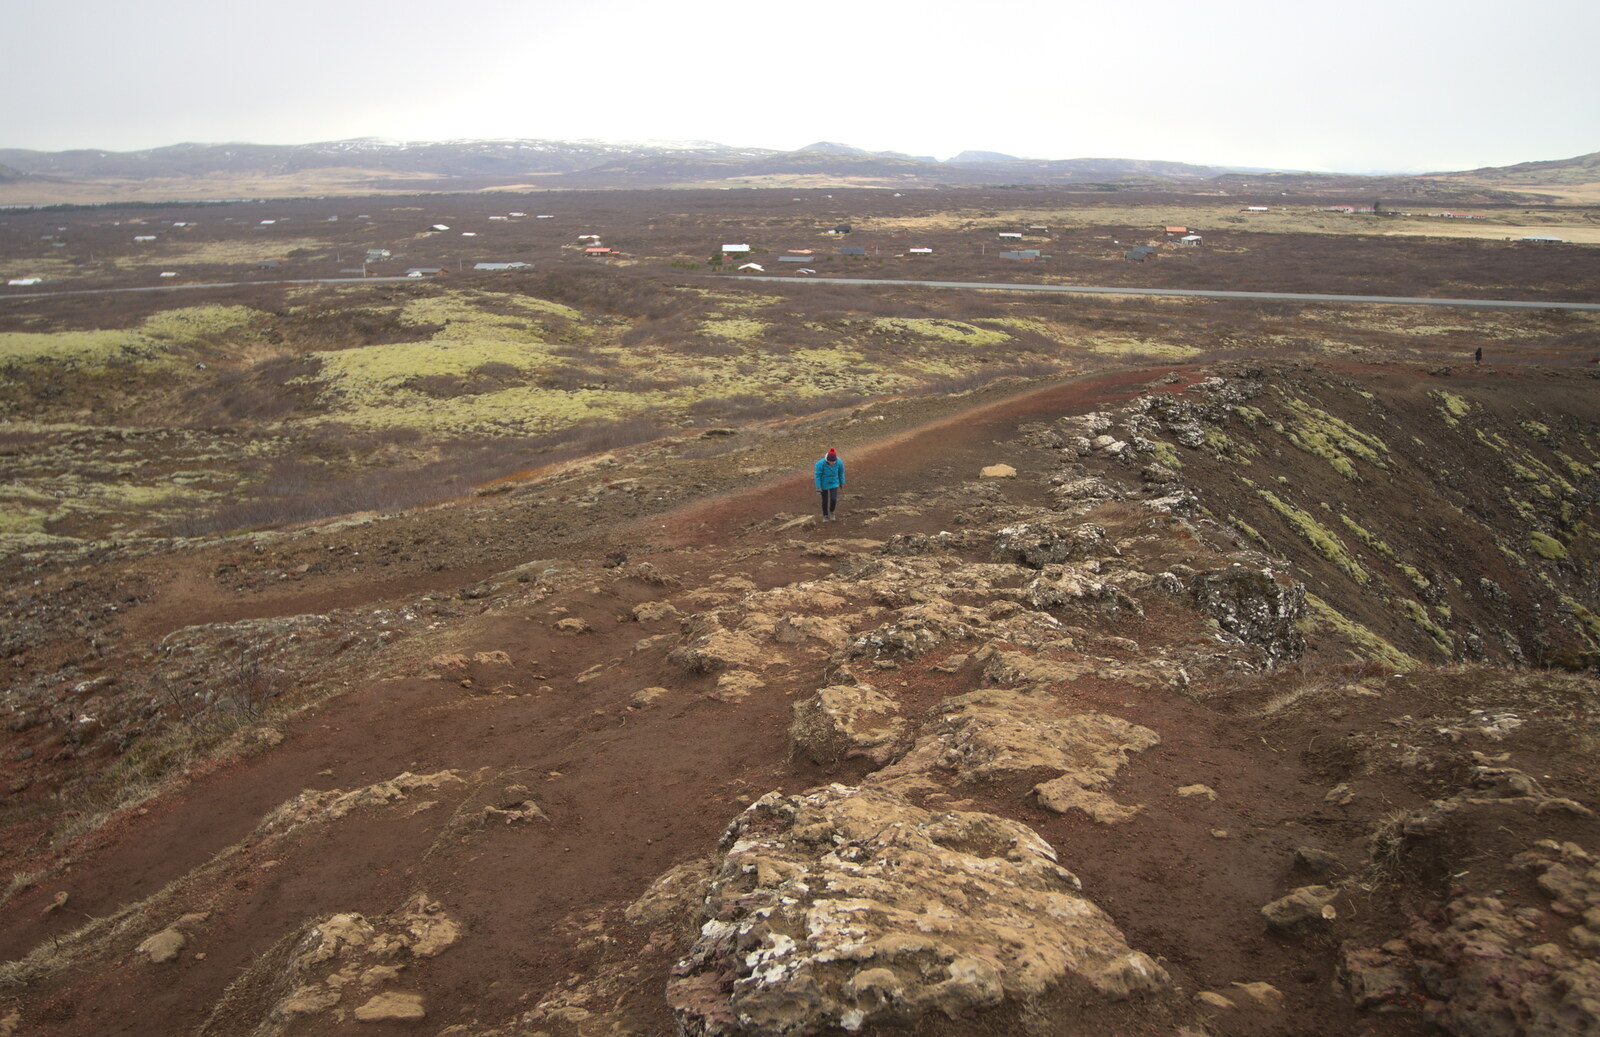 Isobel is a dot in the landscape from The Golden Circle of Ísland, Iceland - 22nd April 2017